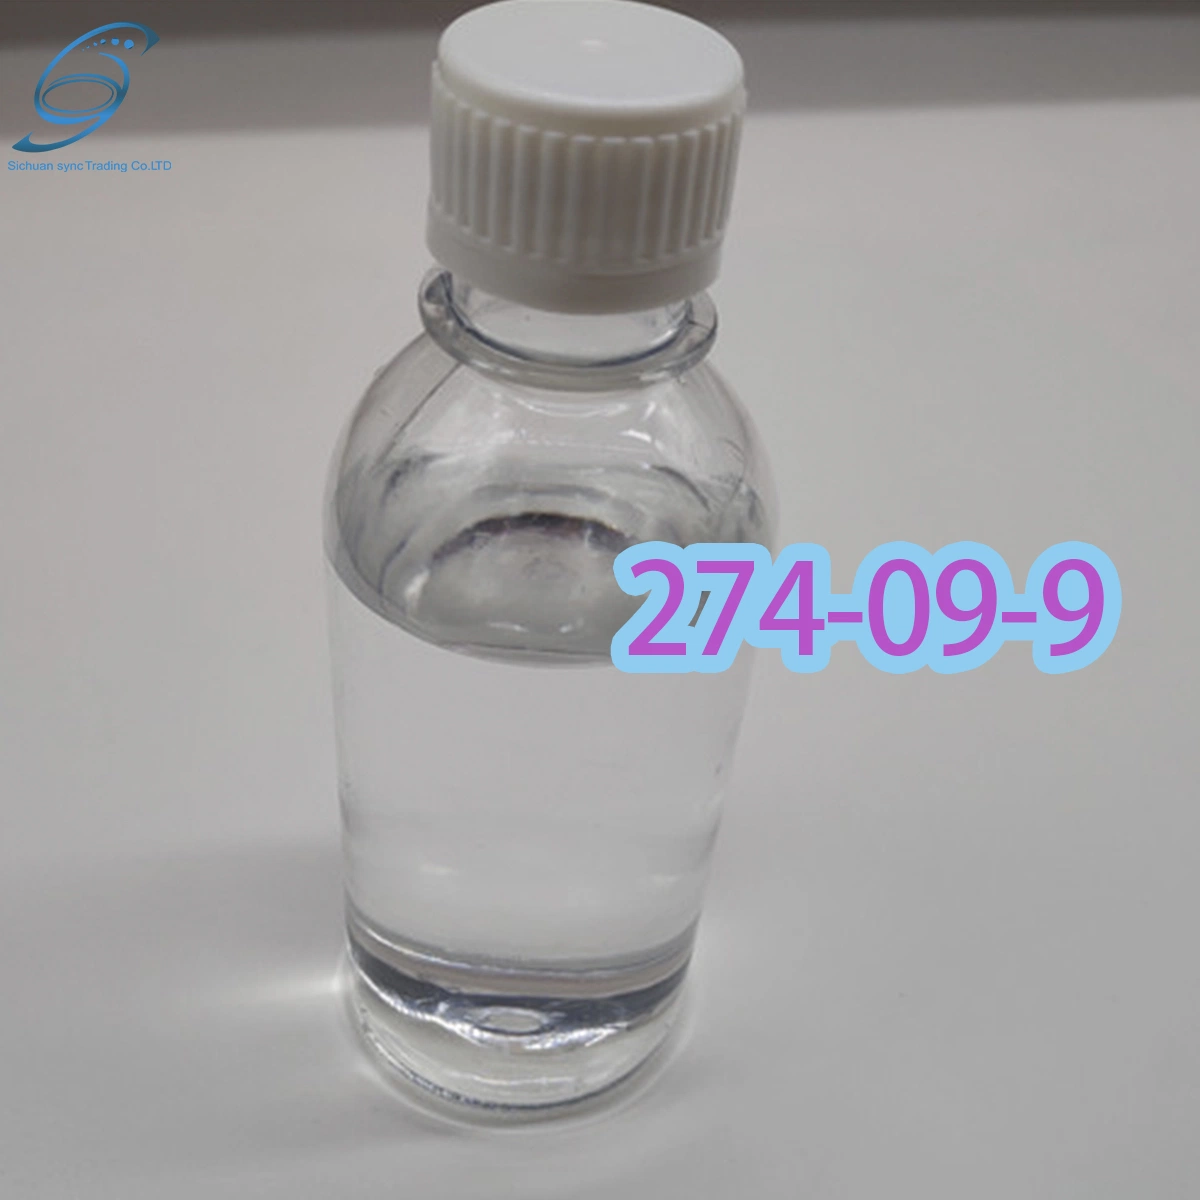 274-09-9/Chemical Auxiliary/Other Chemicals/Weight Loss/1 2-Methylenedioxybenzene